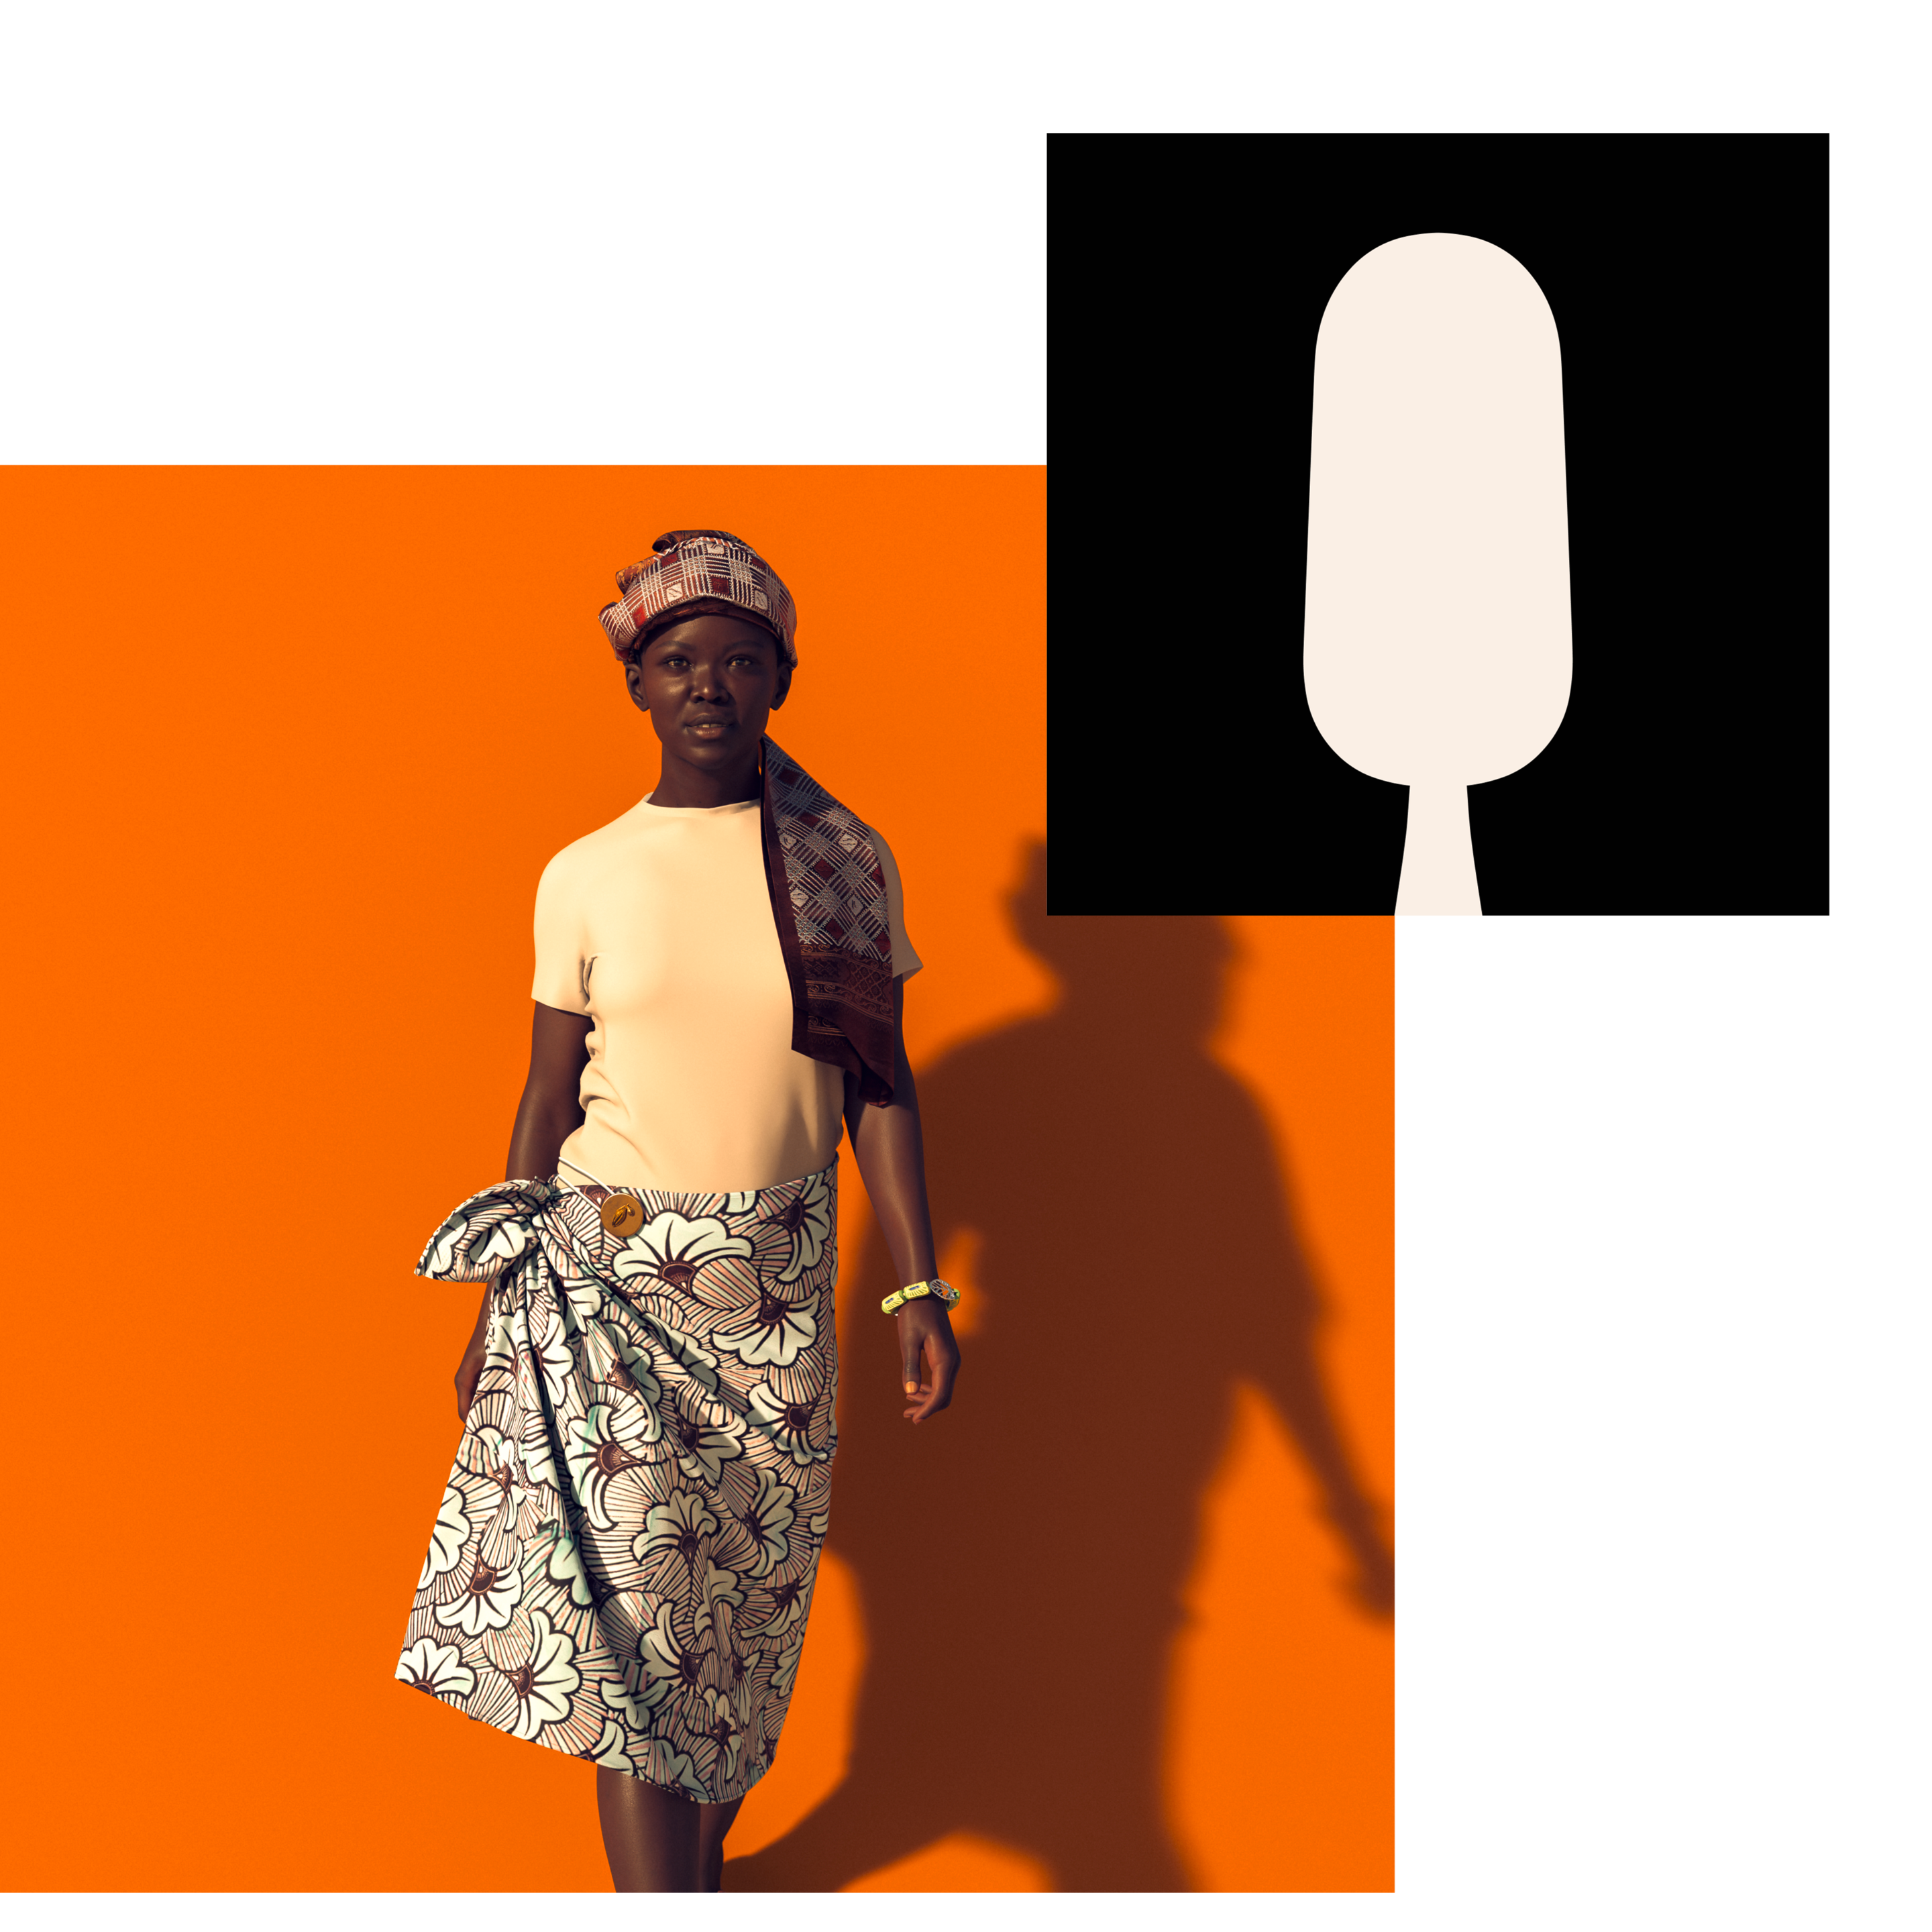 African woman on orange background with black ice cream silhouette on background